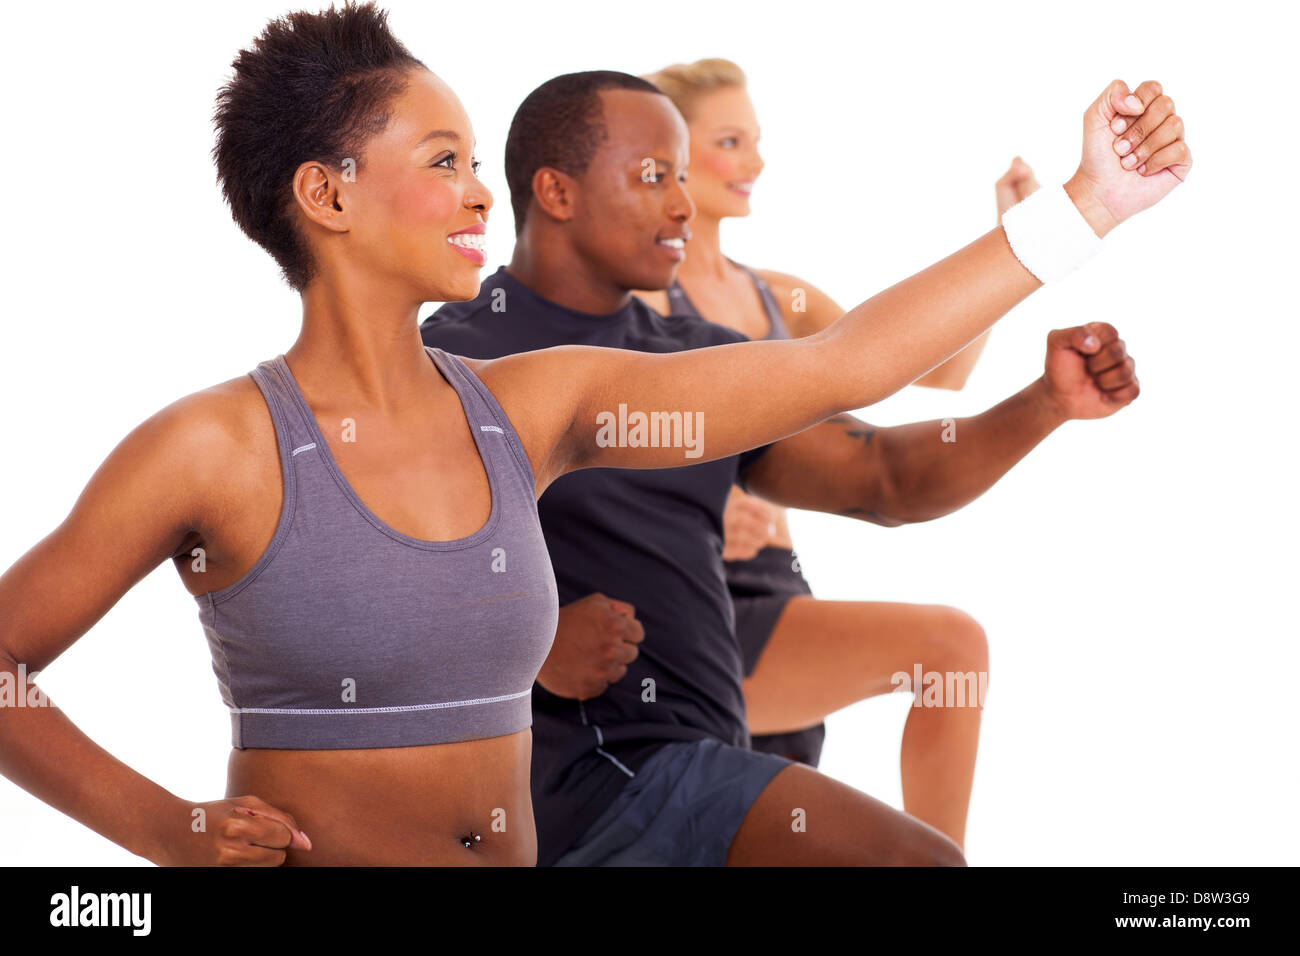 group of cheerful fit people exercising on white background Stock Photo